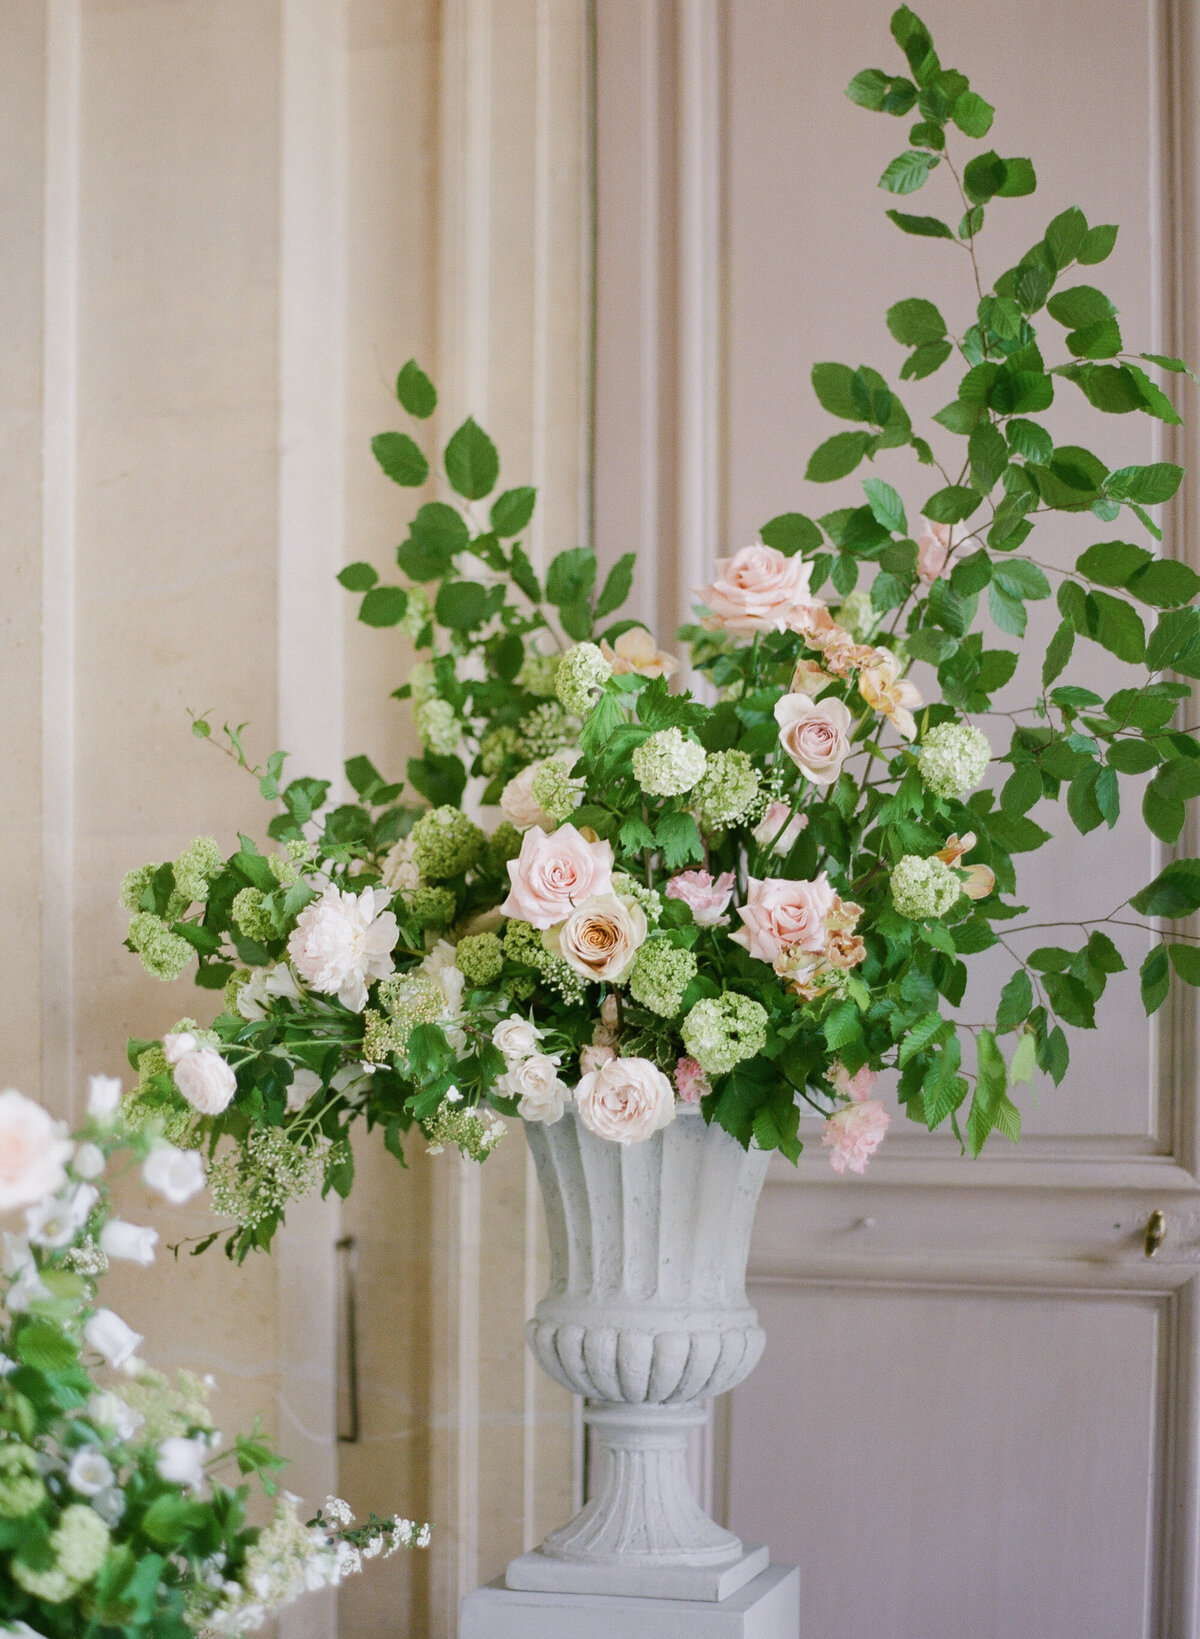 Jennifer Fox Weddings English speaking wedding planning & design agency in France crafting refined and bespoke weddings and celebrations Provence, Paris and destination Laurel-Chris-Chateau-de-Champlatreaux-Molly-Carr-Photography-59